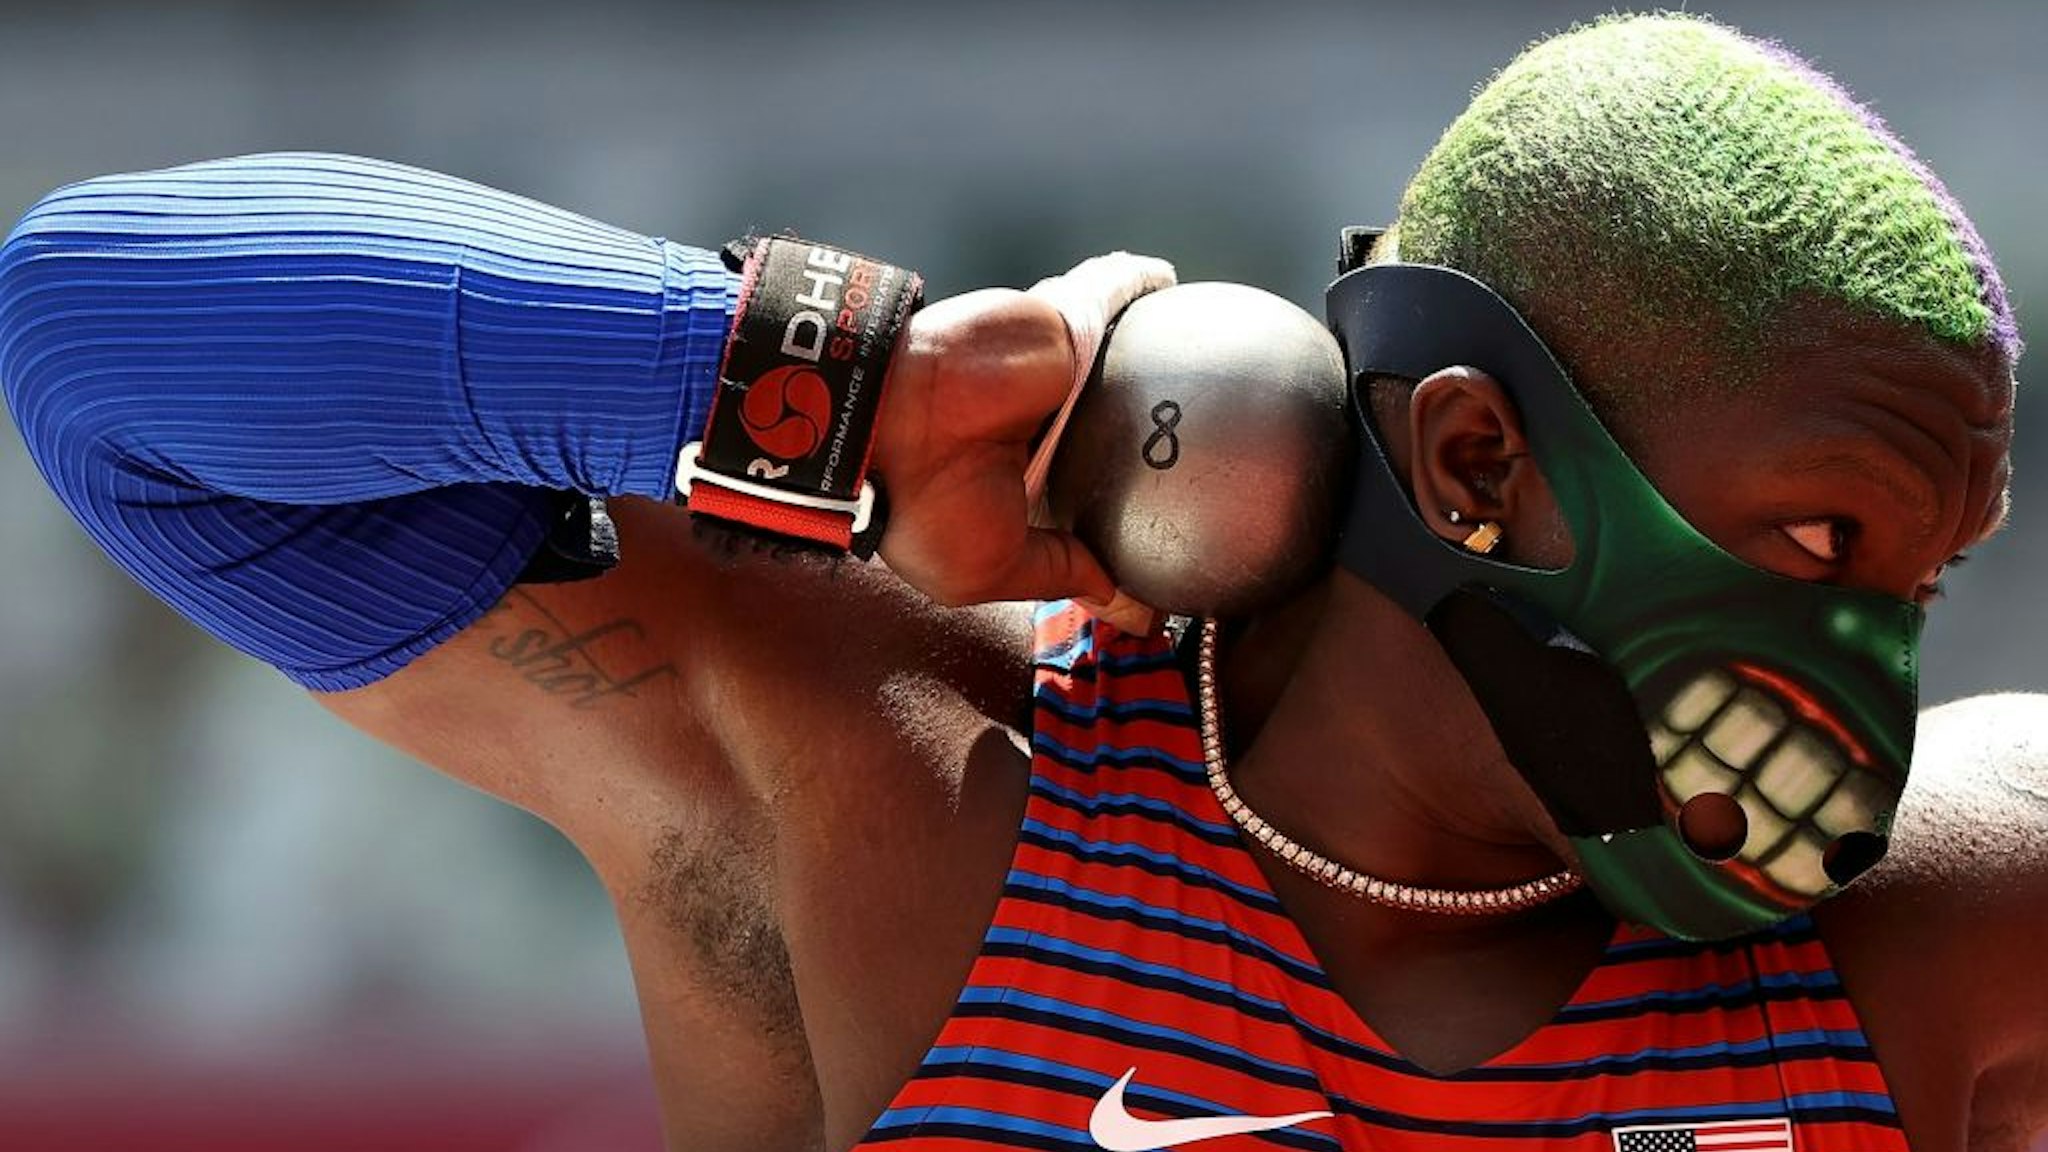 Raven Saunders of the United States competes during the women's shot put final at Tokyo 2020 Olympic Games, in Tokyo, Japan, Aug. 1, 2021. (Photo by Li Ming/Xinhua via Getty Images)